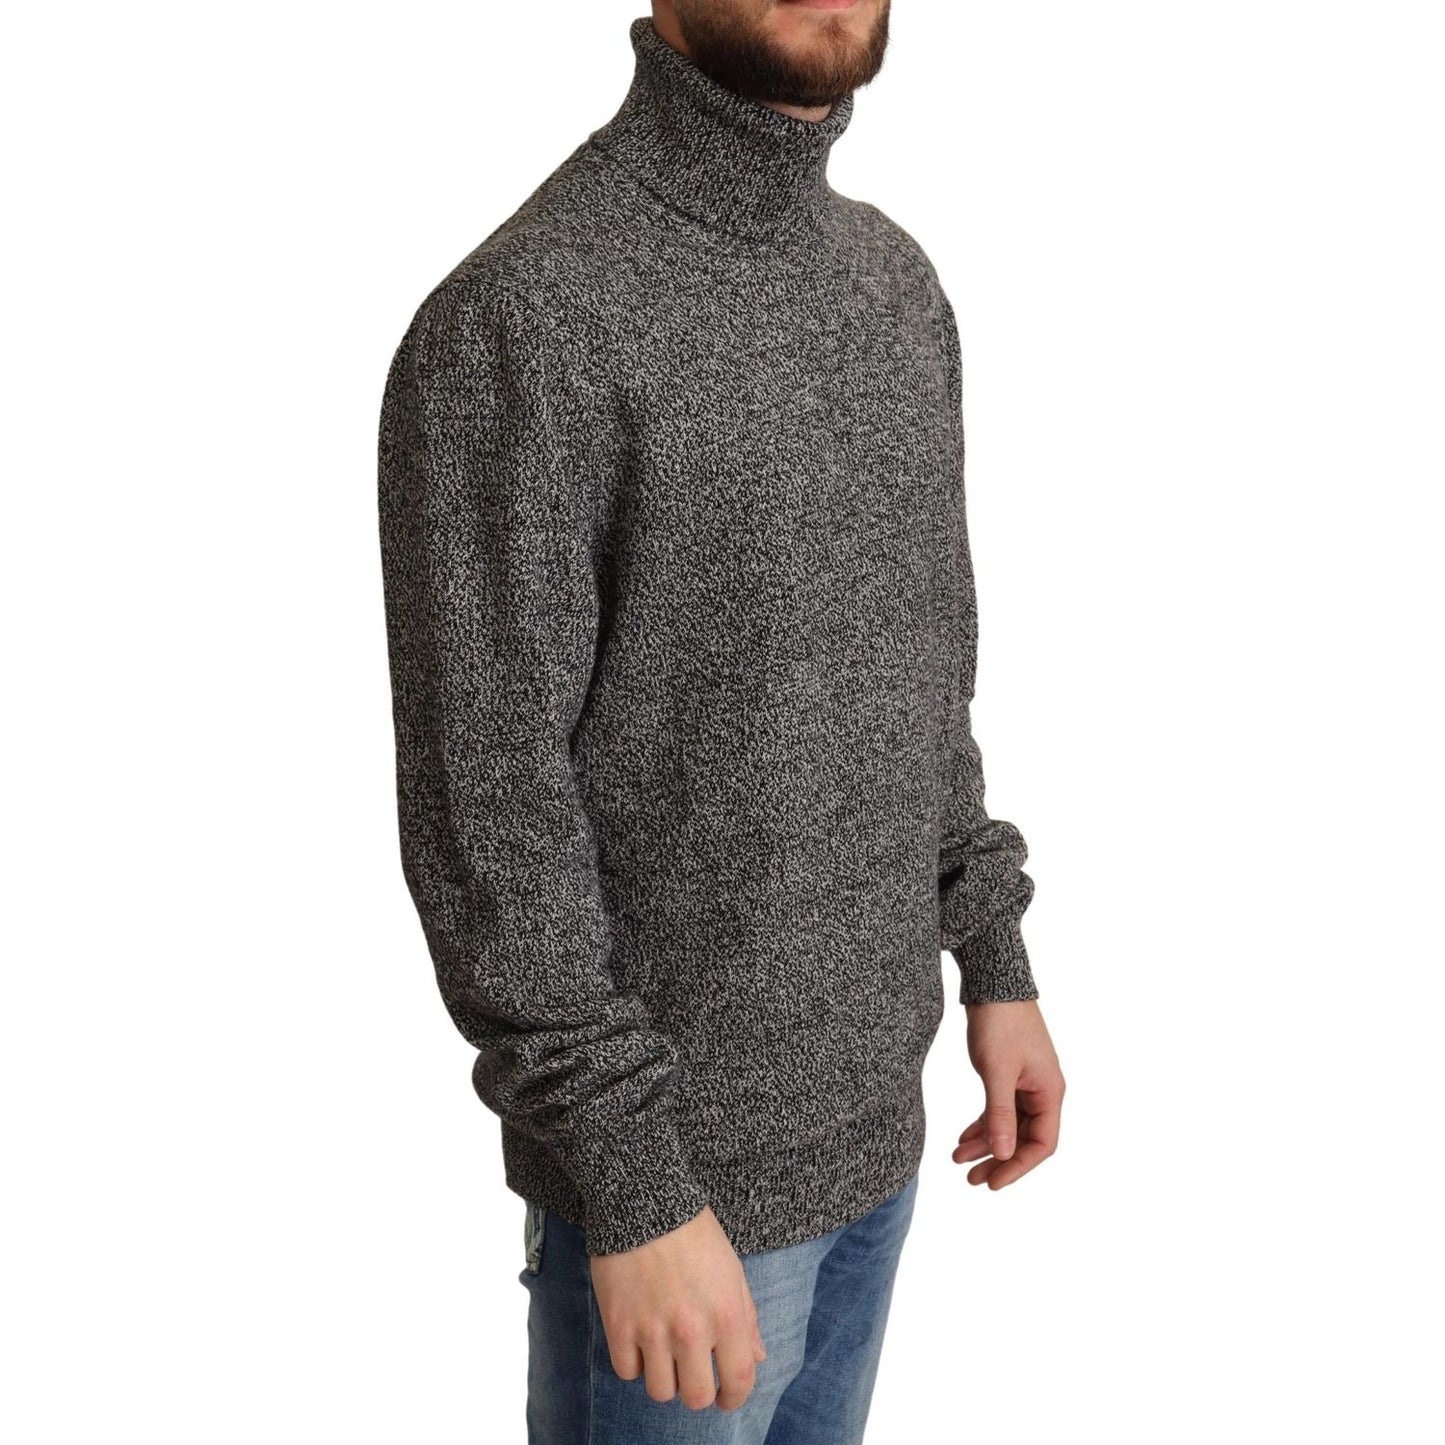 Dolce & Gabbana Gray Turtle Neck Cashmere Pullover Sweater gray-turtle-neck-cashmere-pullover-sweater MAN SWEATERS IMG_0169-scaled-a9c17f00-351.jpg